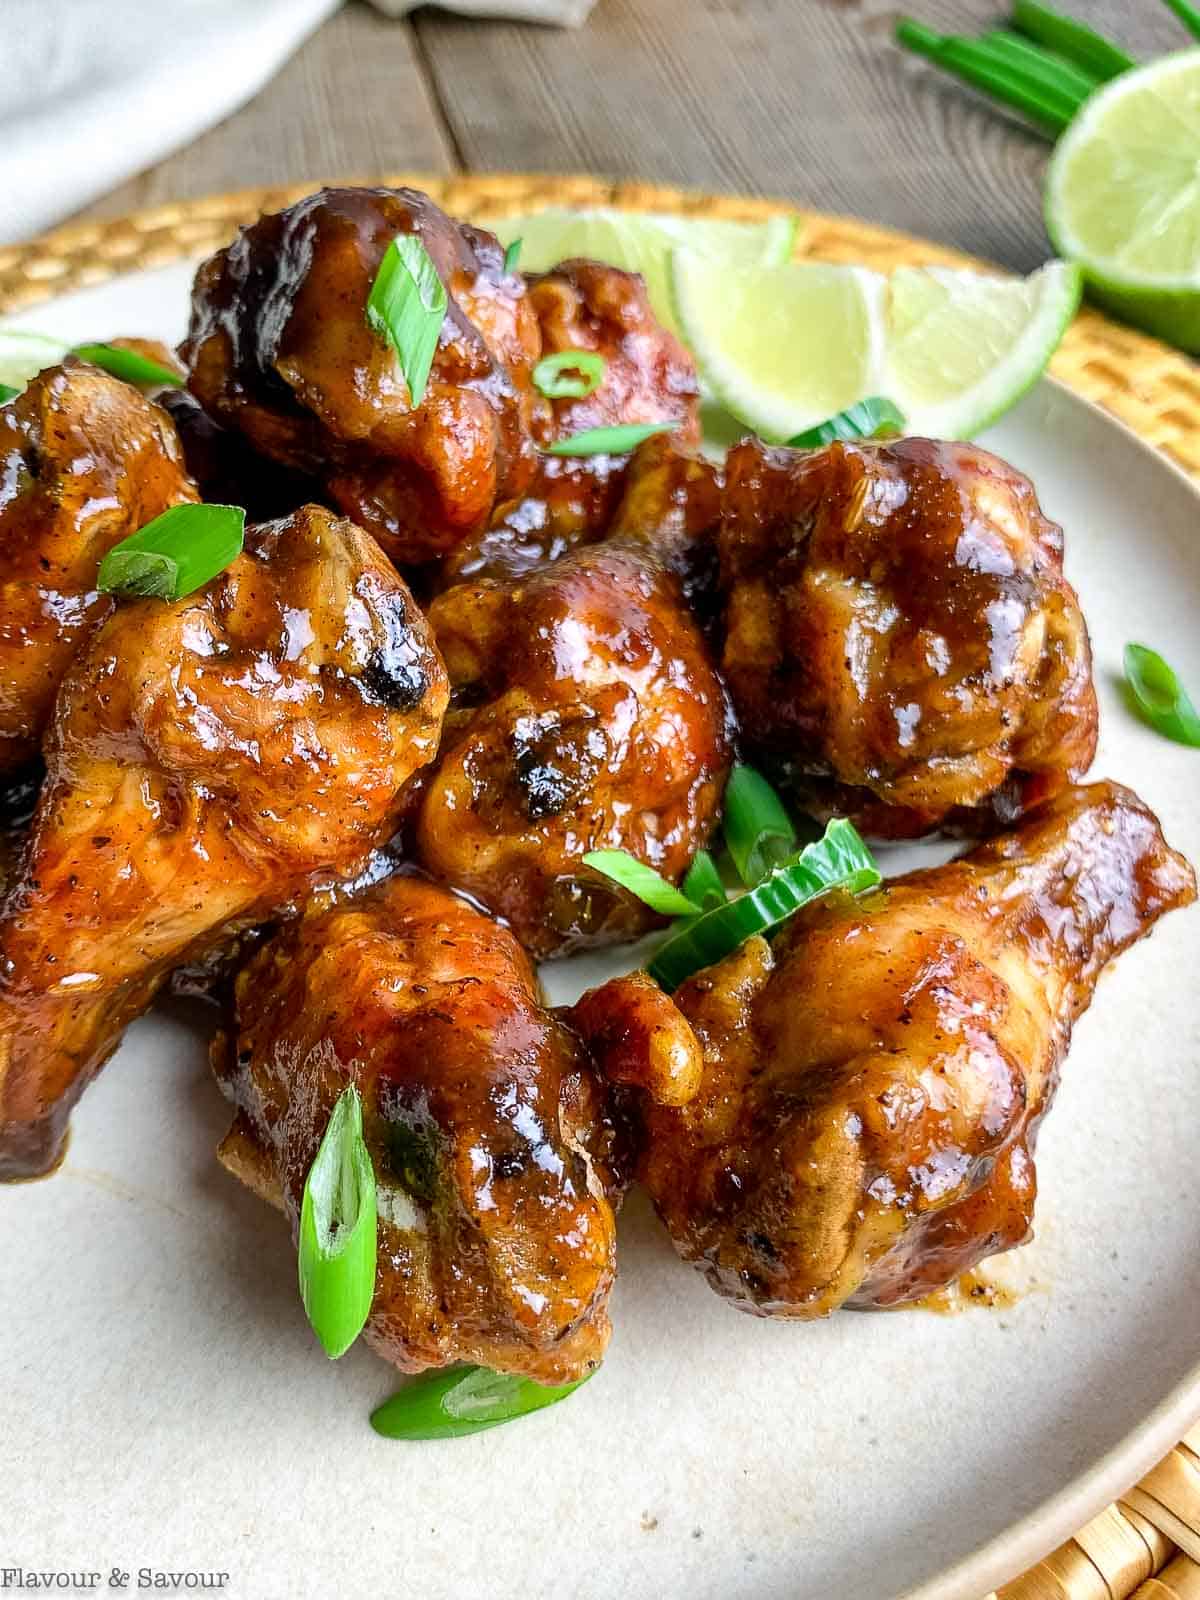 Close up view of jerk chicken wings garnished with green onions and jalapeño slices.